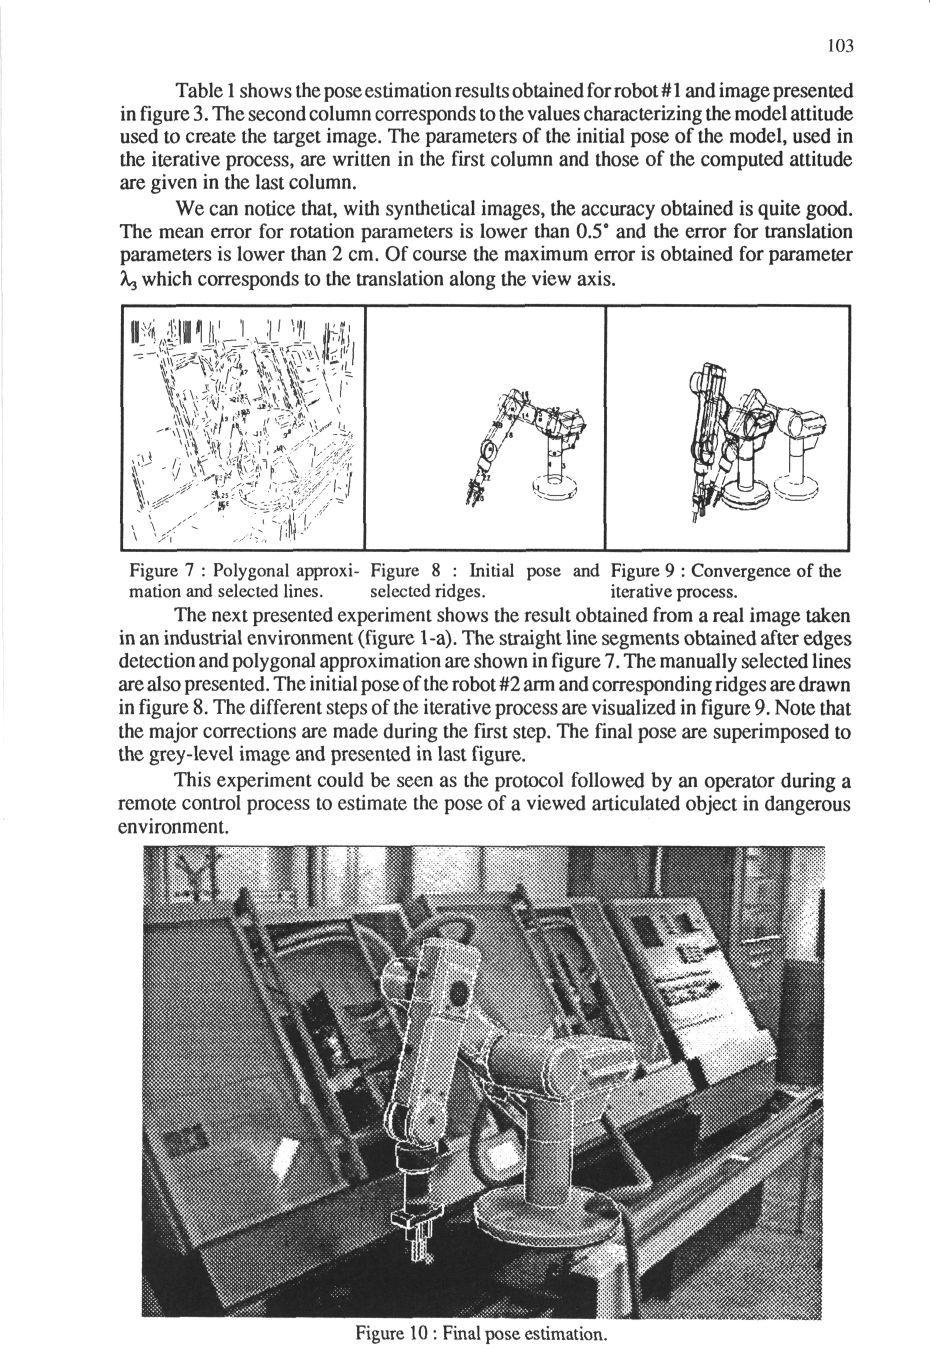 Table 1 shows the pose estimation results obtained for robot # 1 and image presented in figure 3.